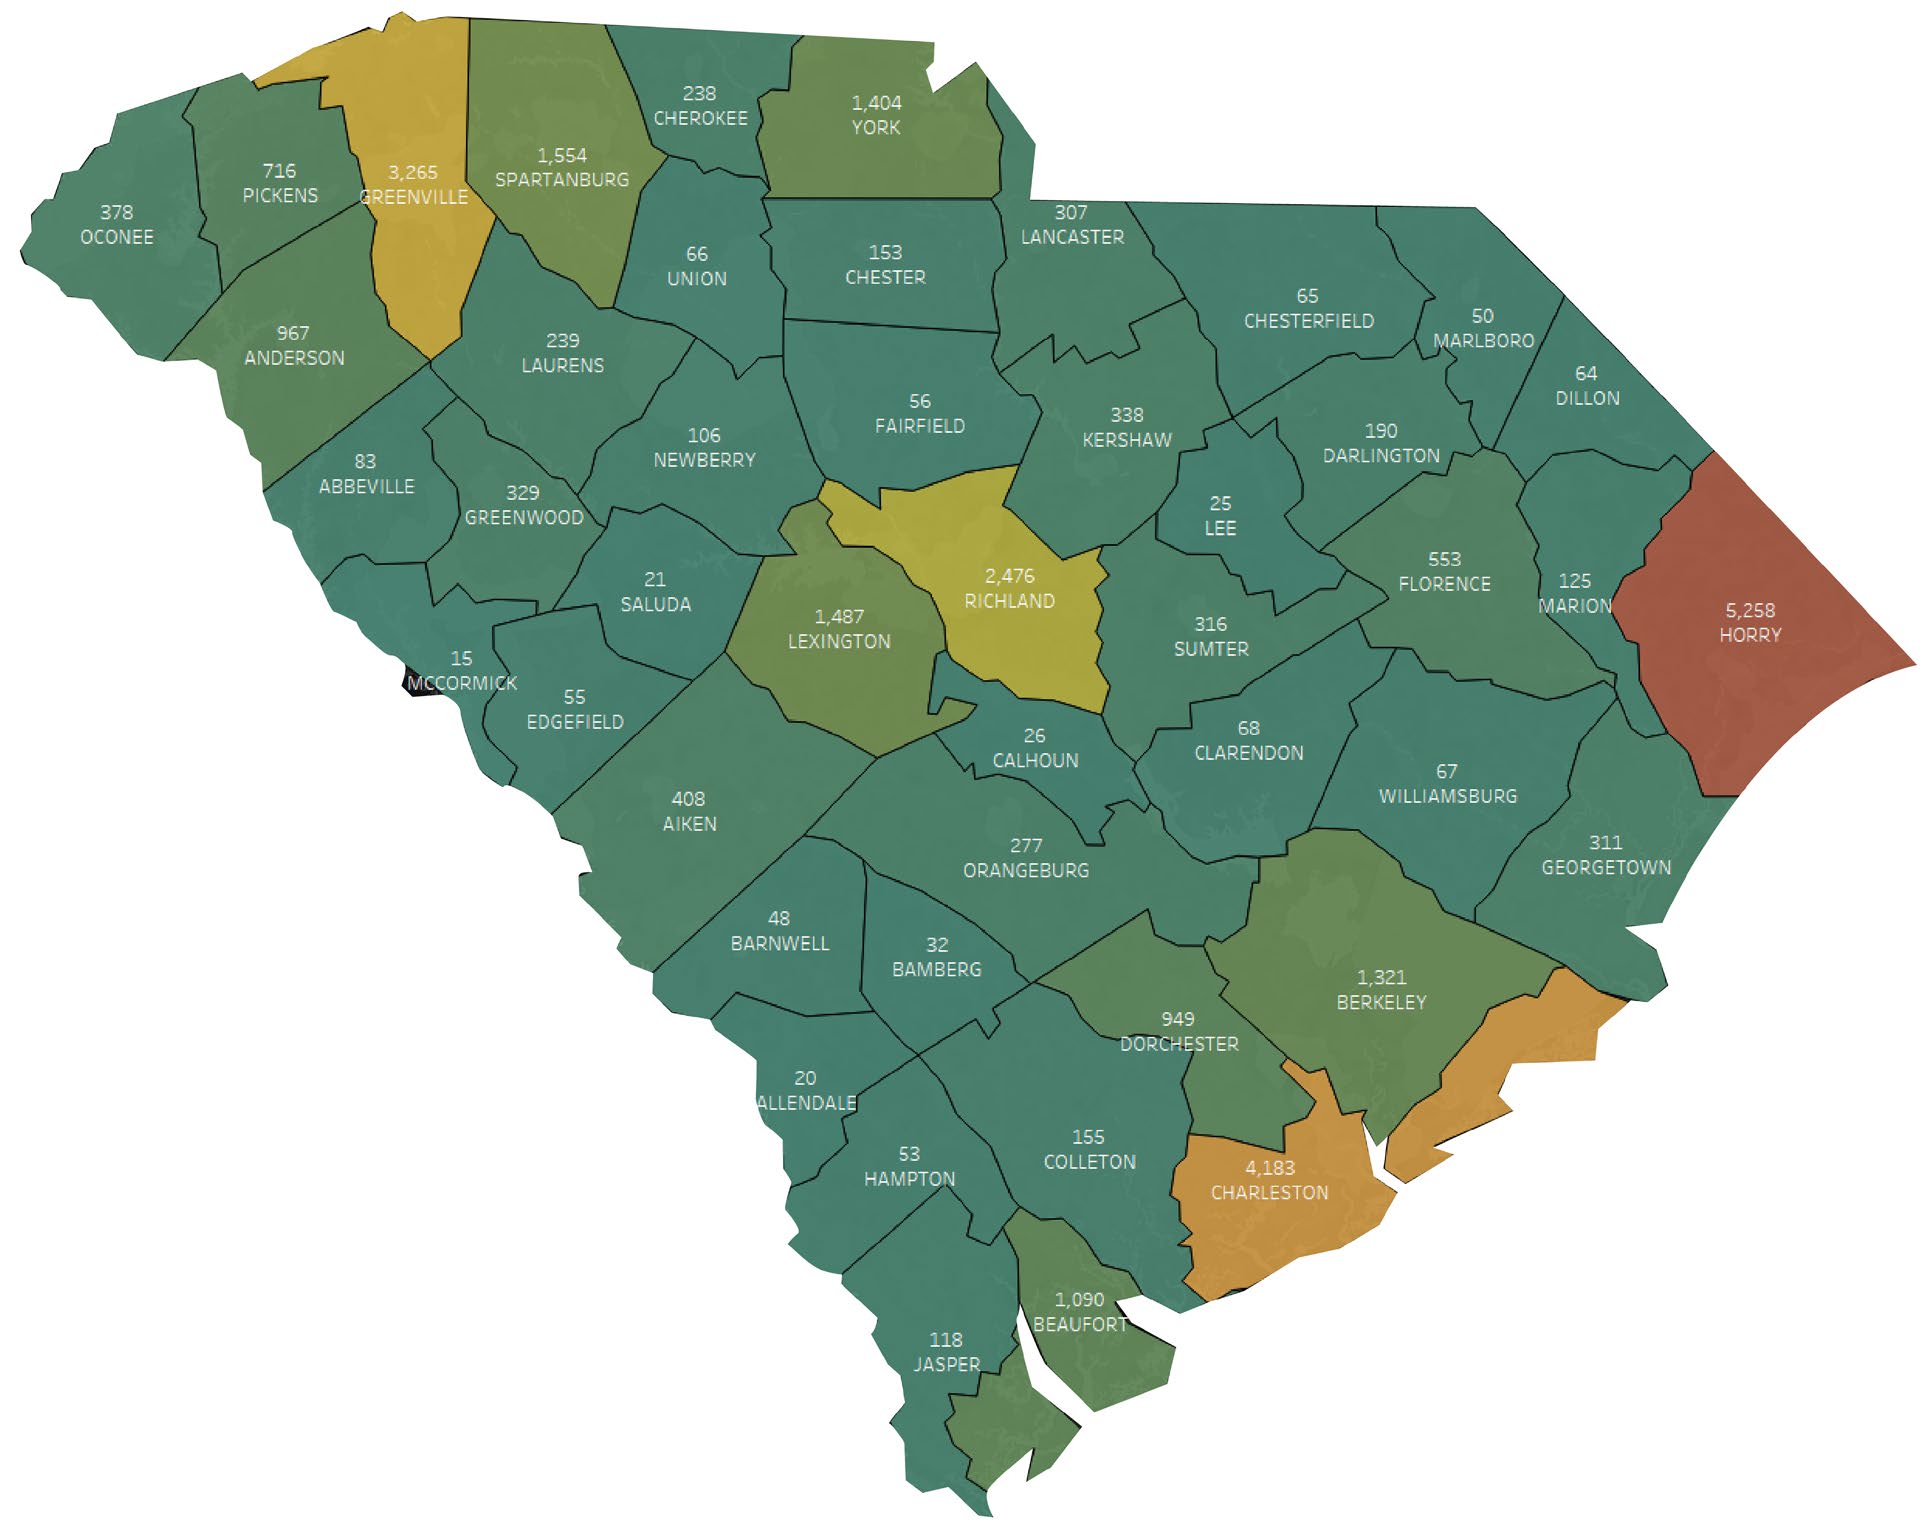 South Carolina Initial Unemployment Insurance Claims Data Week Ending March 21, 2020